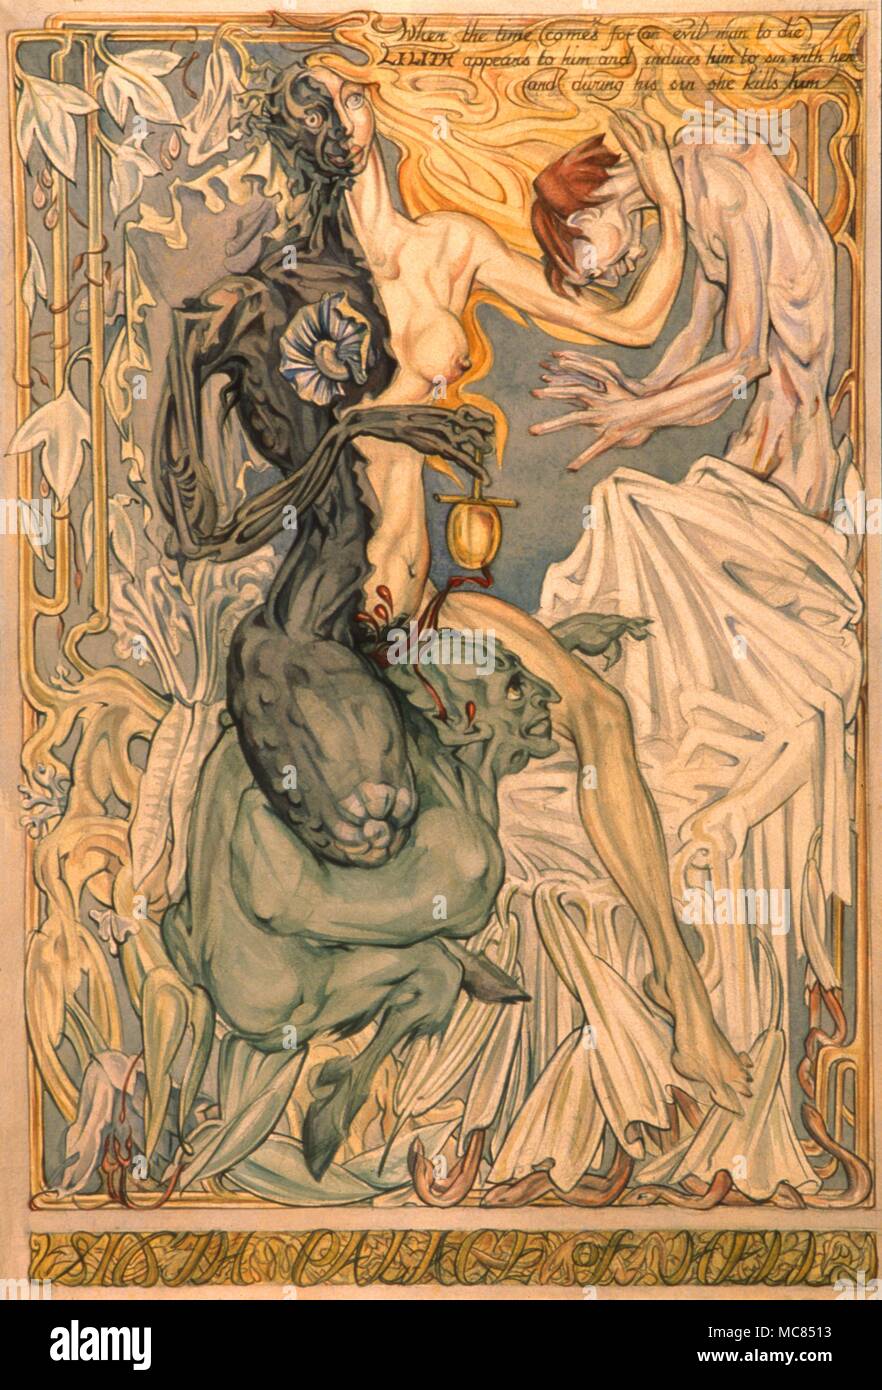 Watercolour painting by Fay Pomerance depicting the demon Lilith with Samael [upon whom she is seated]. The painting is entitled, 'The Sixth Palace of Hell', and relates to the death-bed experience of the evil man. Stock Photo